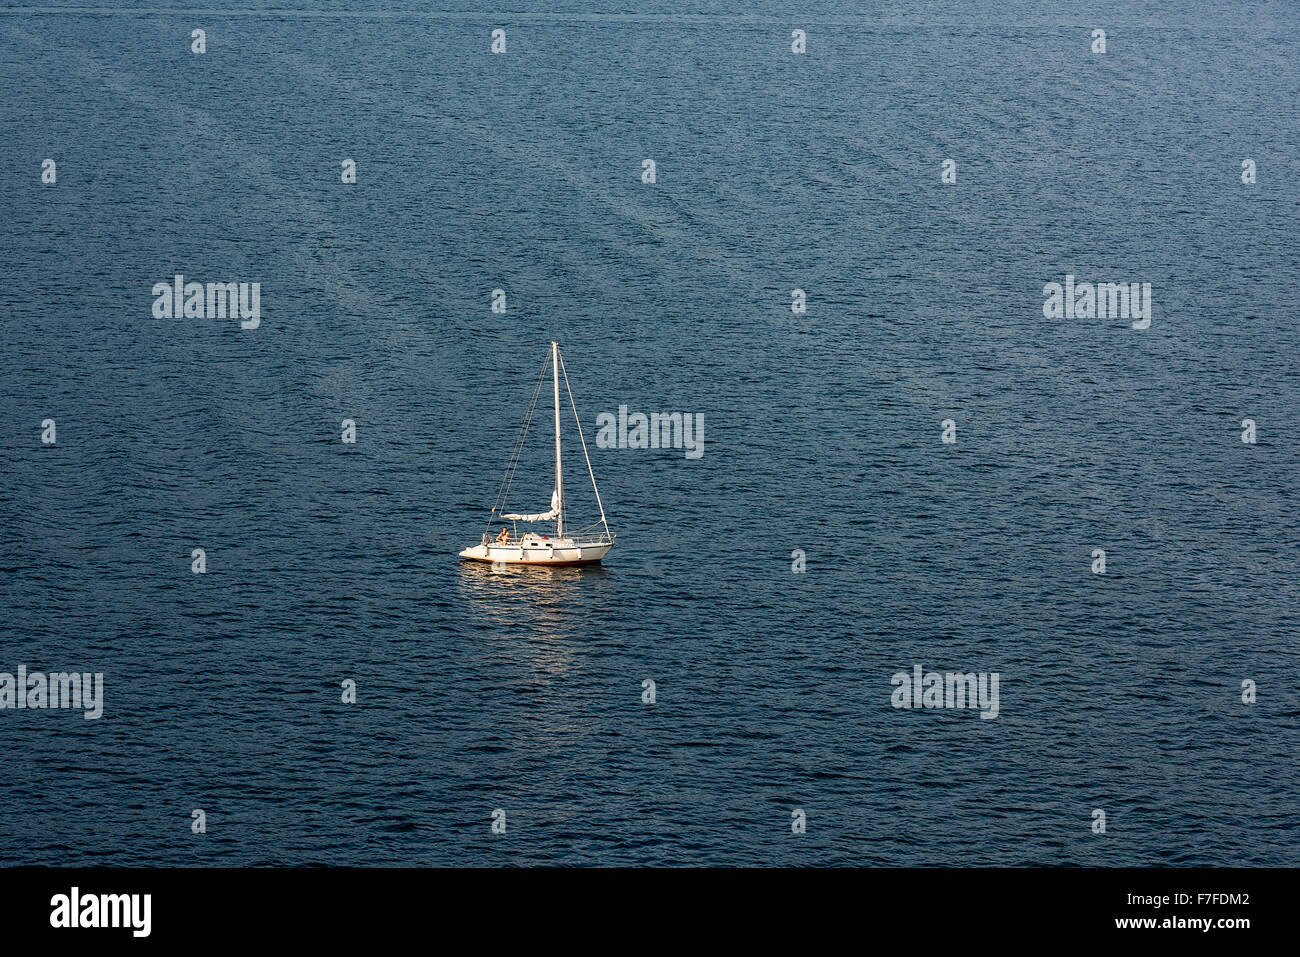 Sailboat on calm ocean water. Stock Photo